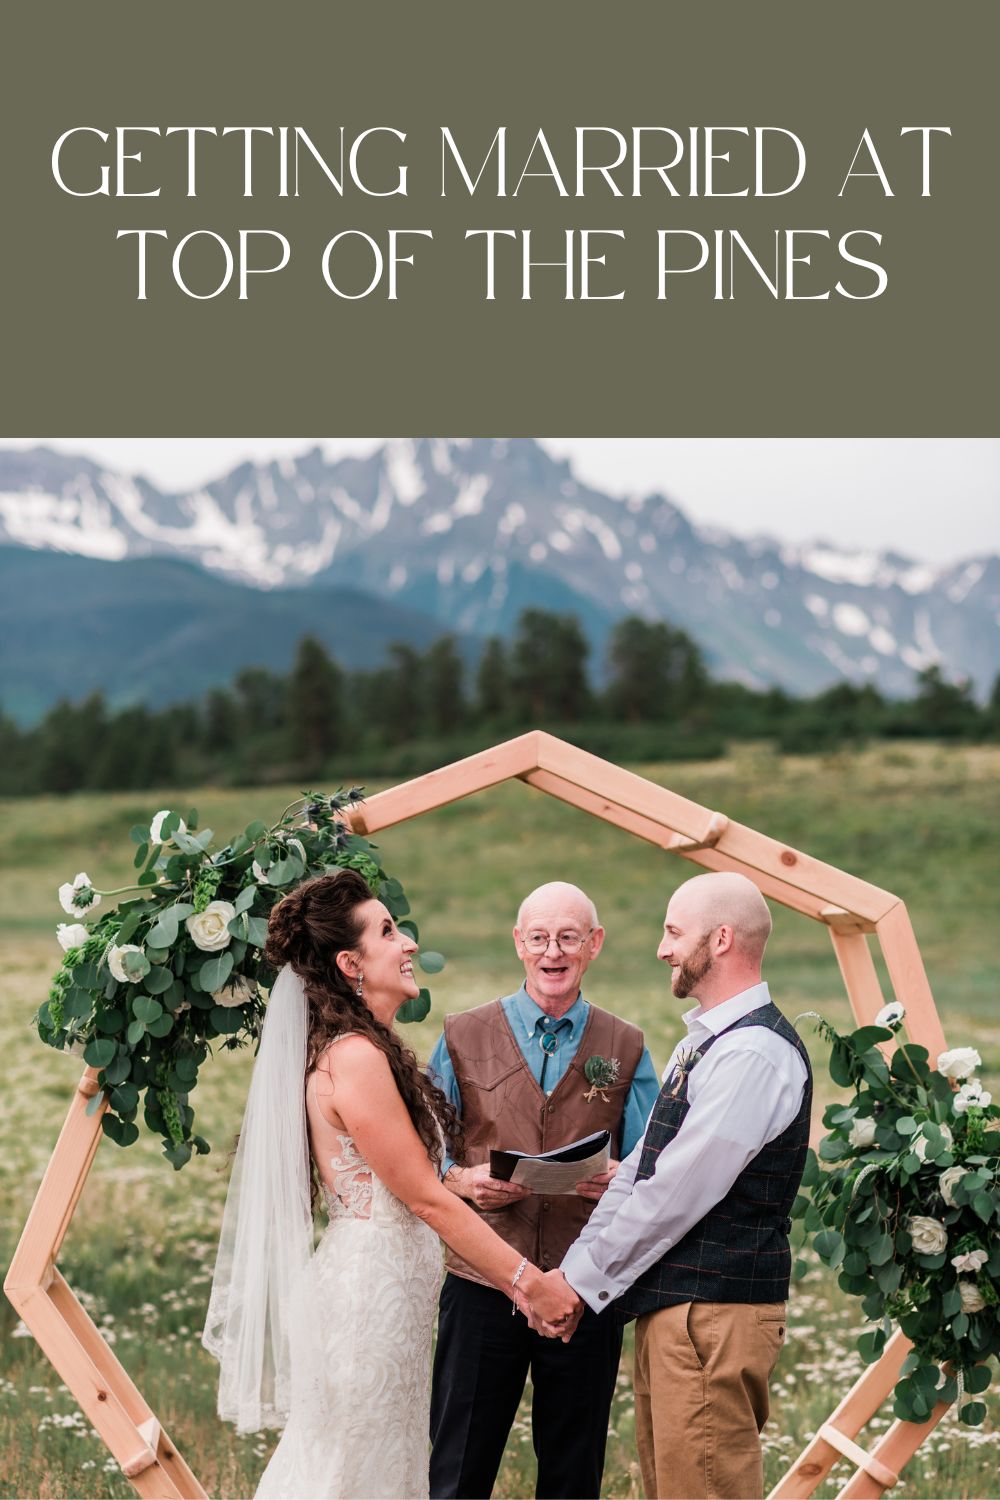 Getting Married at Top of the Pines